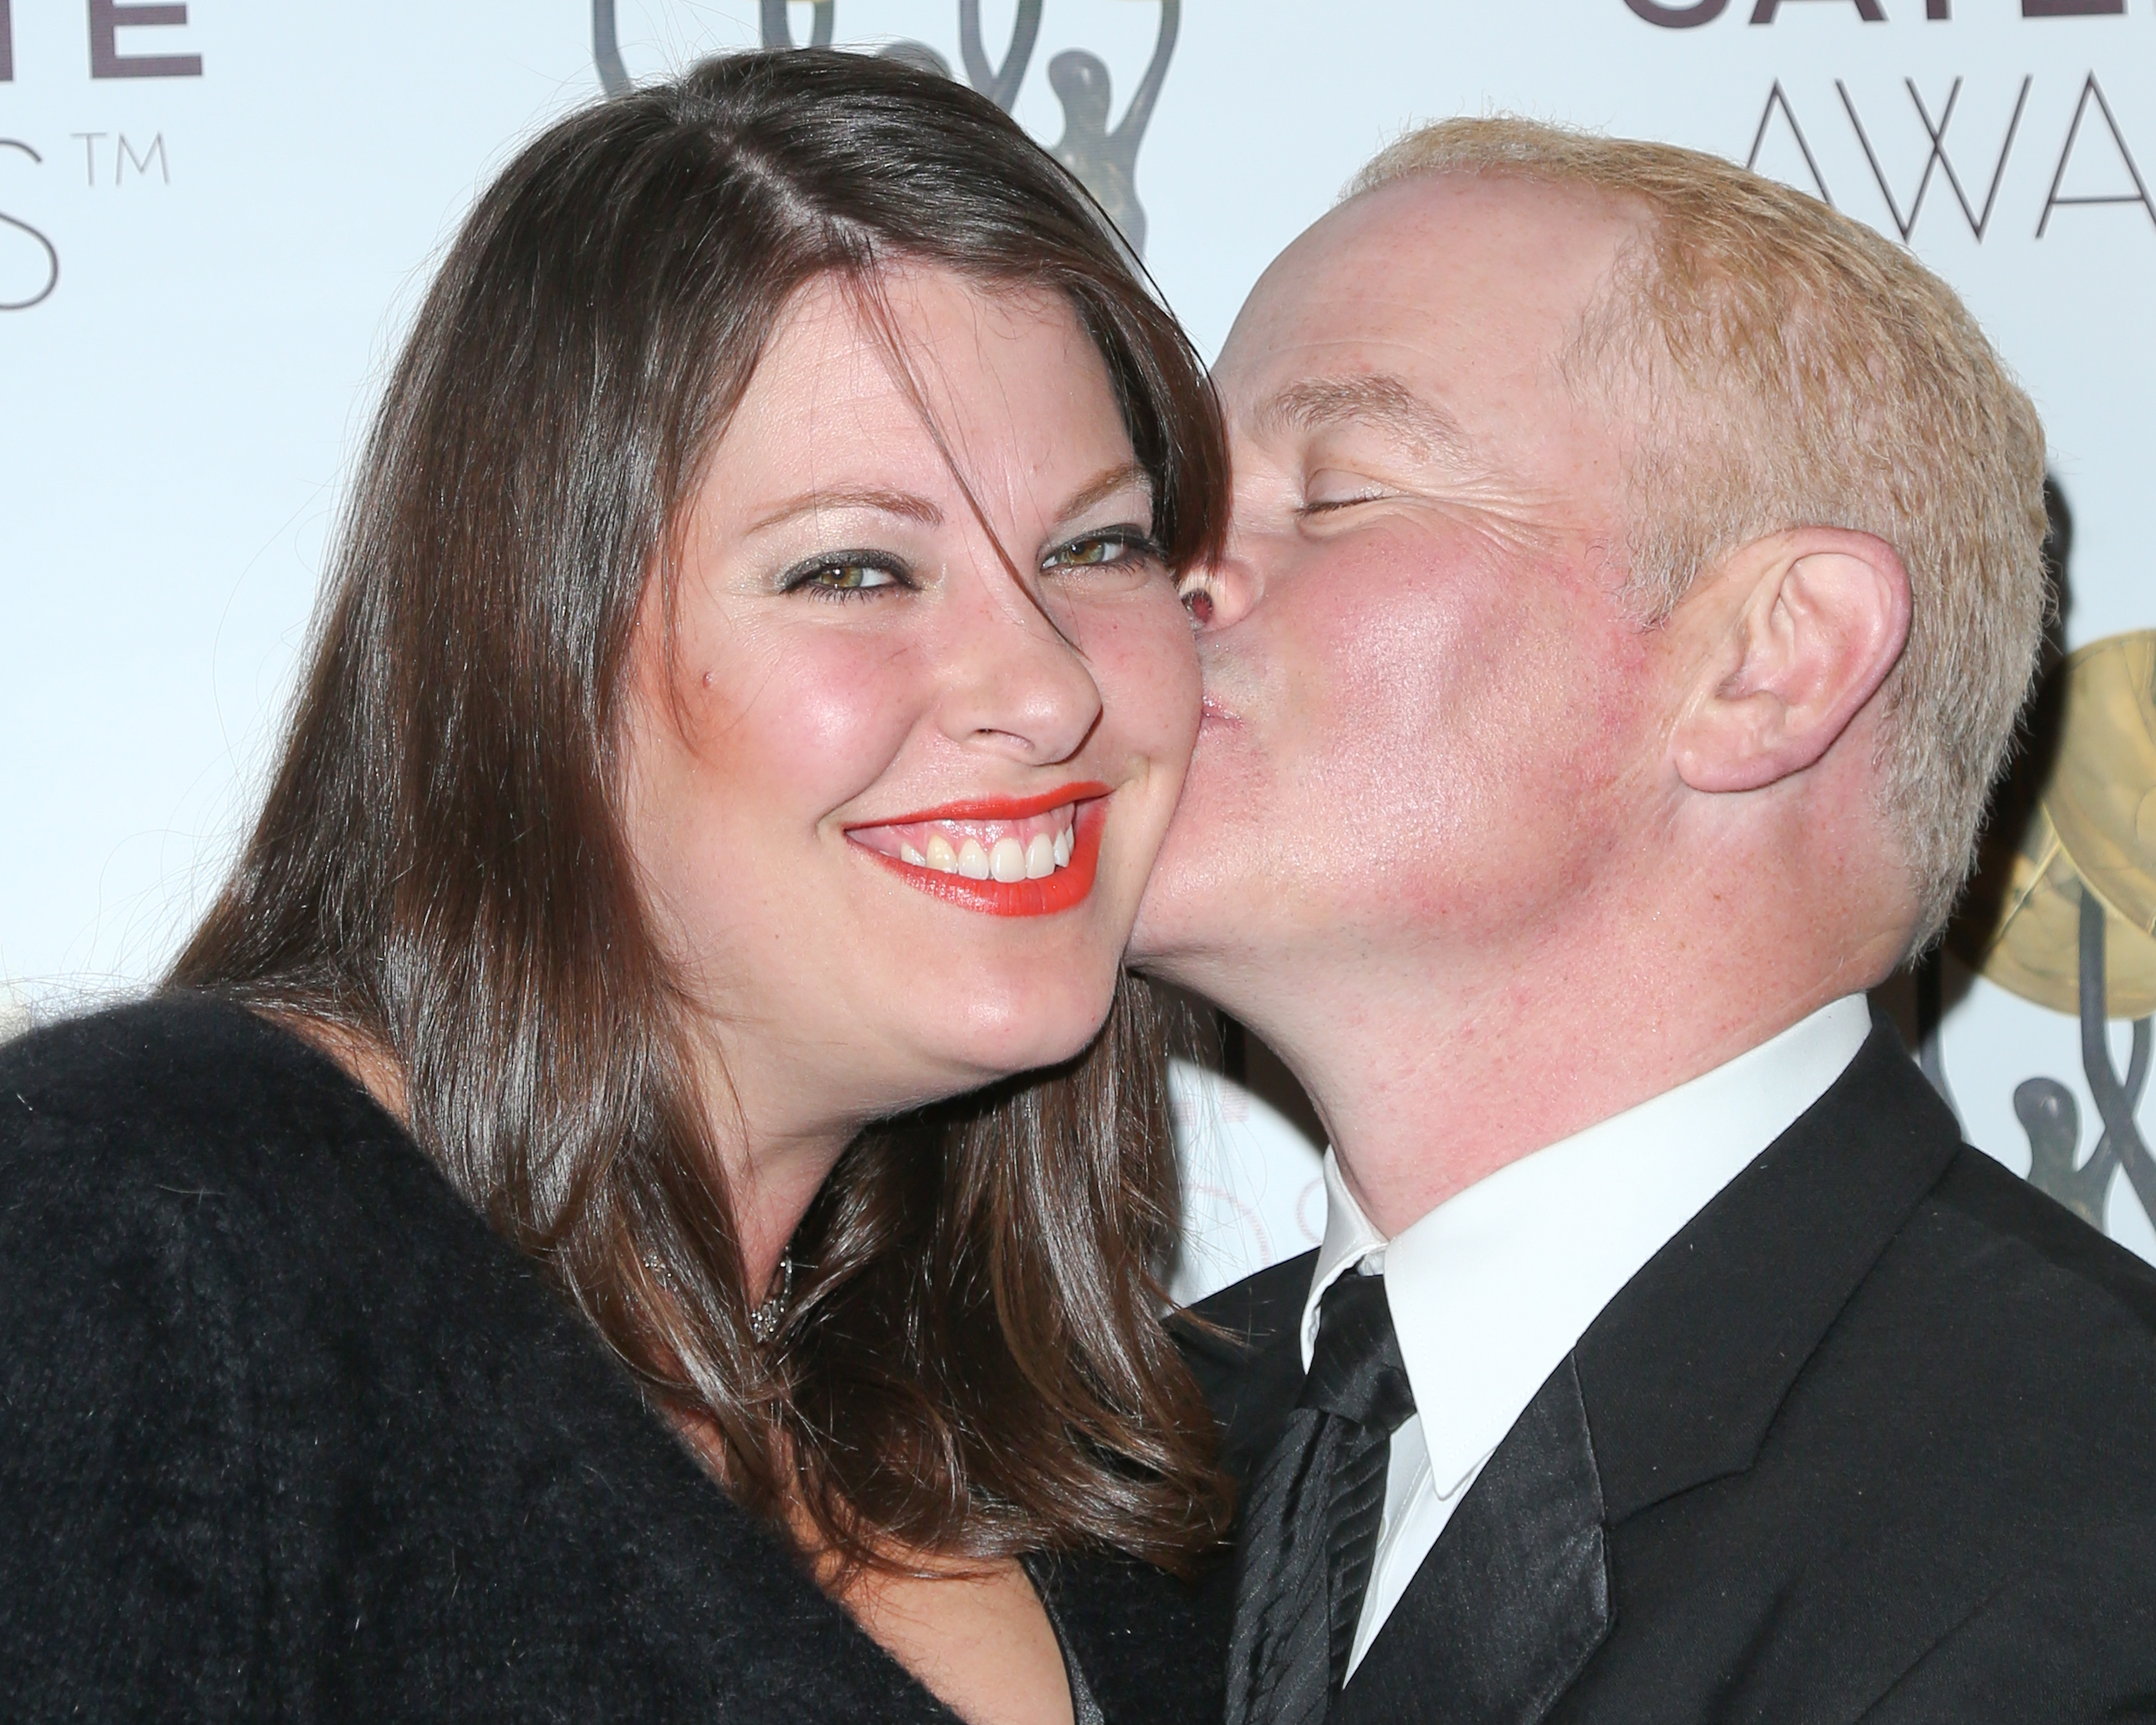 Ruve McDonough (L) and Actor Neal McDonough (R) attend the International Press Academy's 17th Annual Satellite Awards at InterContinental Hotel on December 16, 2012, in Century City, California. | Source: Getty Images